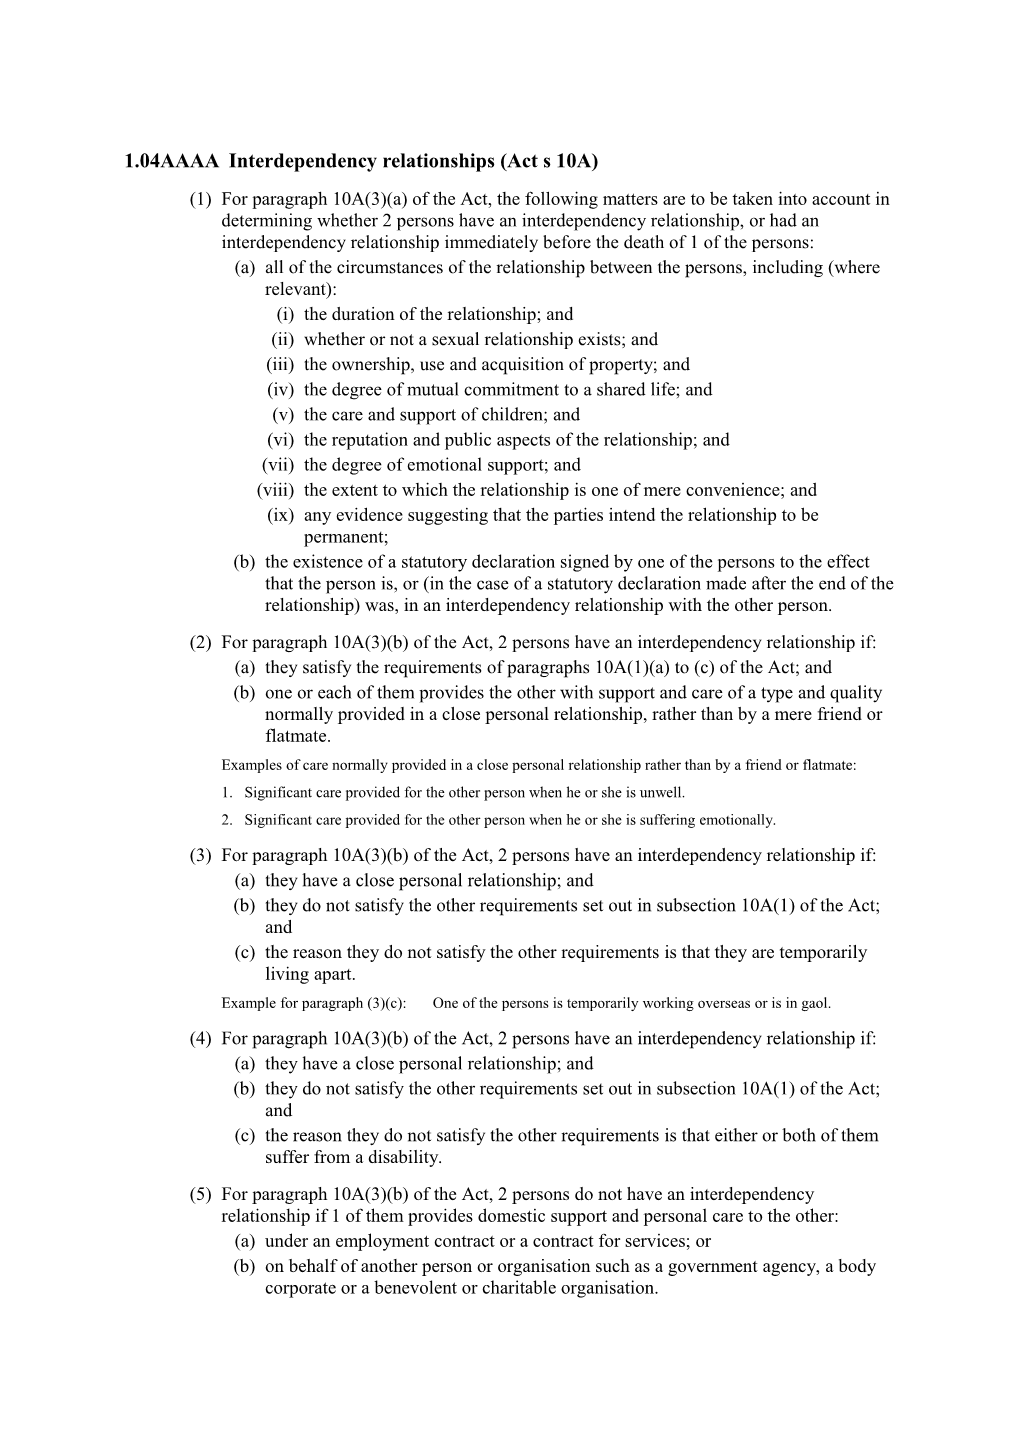 1.04AAAA Interdependency Relationships (Act S 10A)